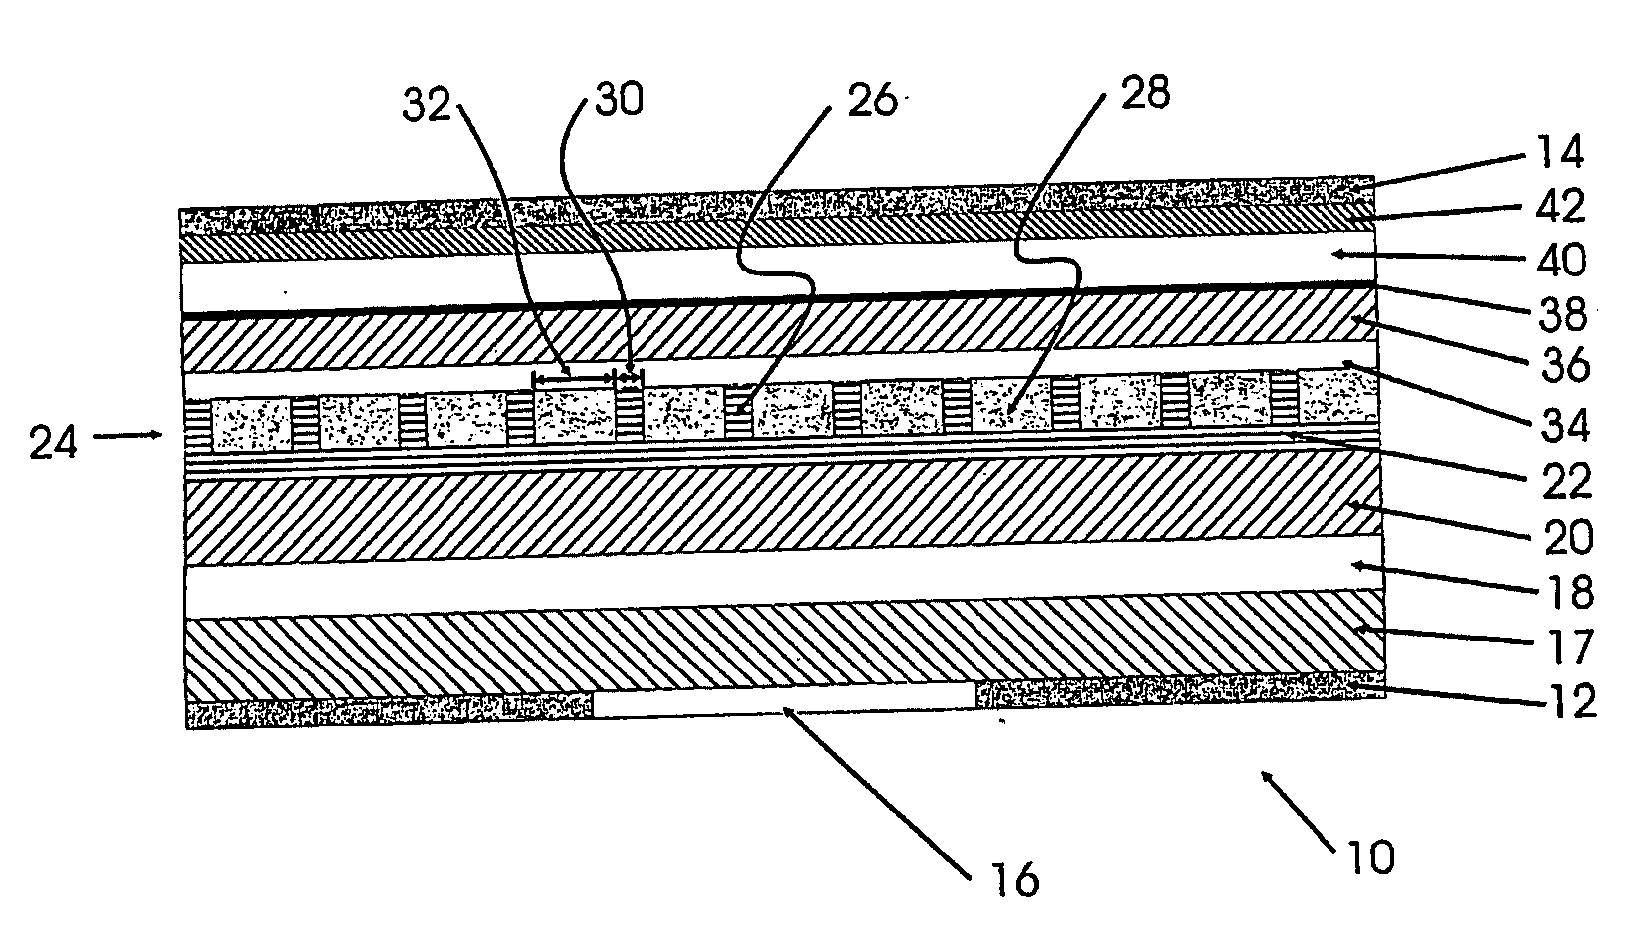 Surface emitting dfb laser structures for broadband communication systems and array of same